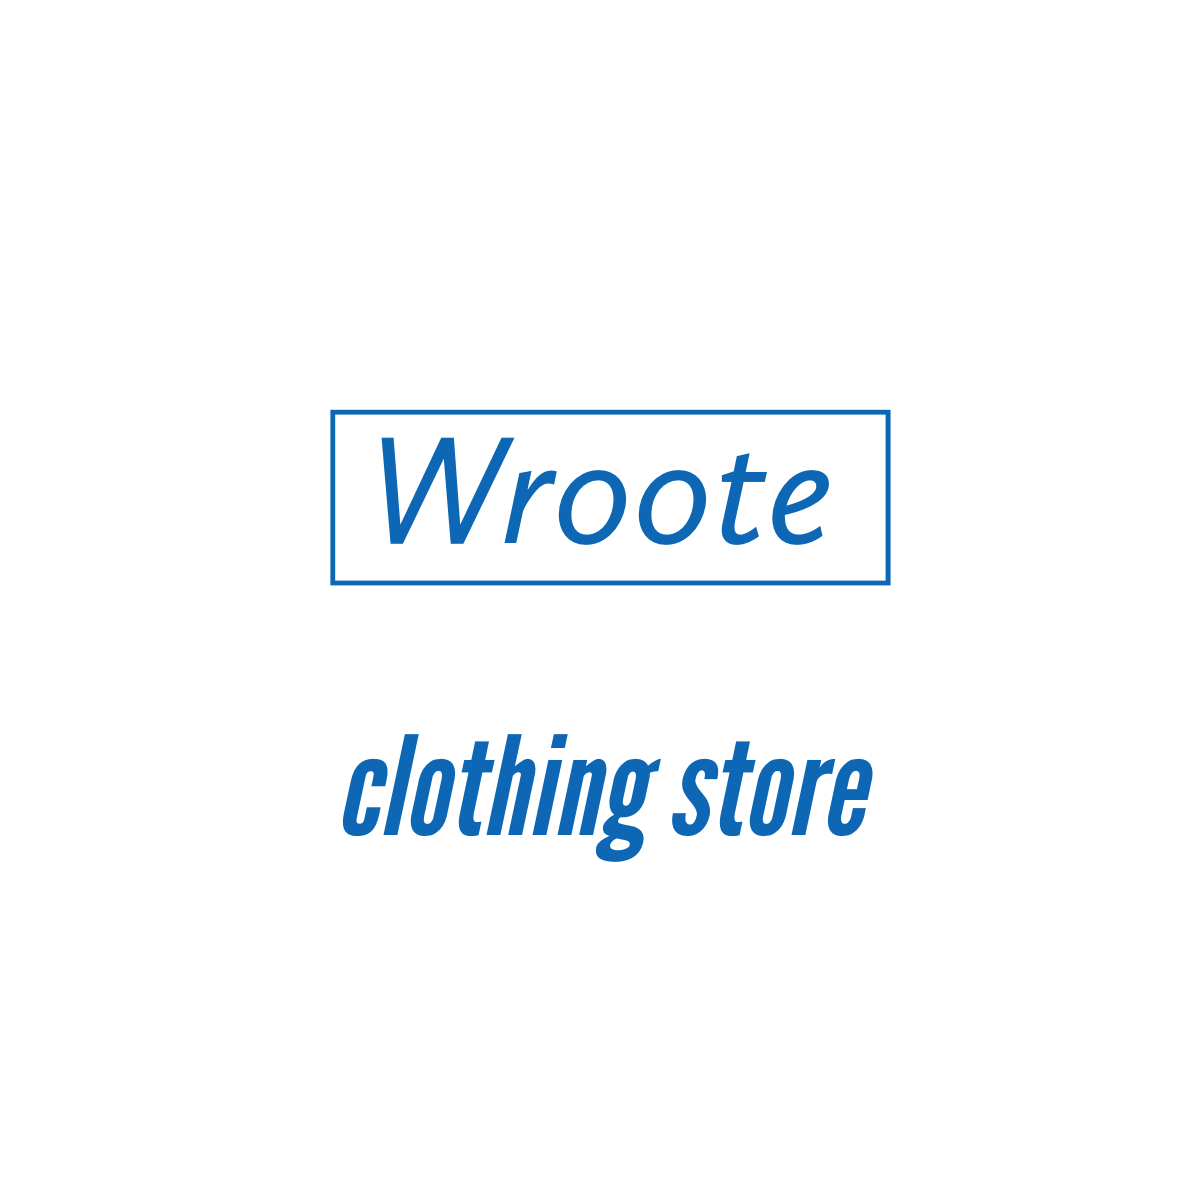 Wroote